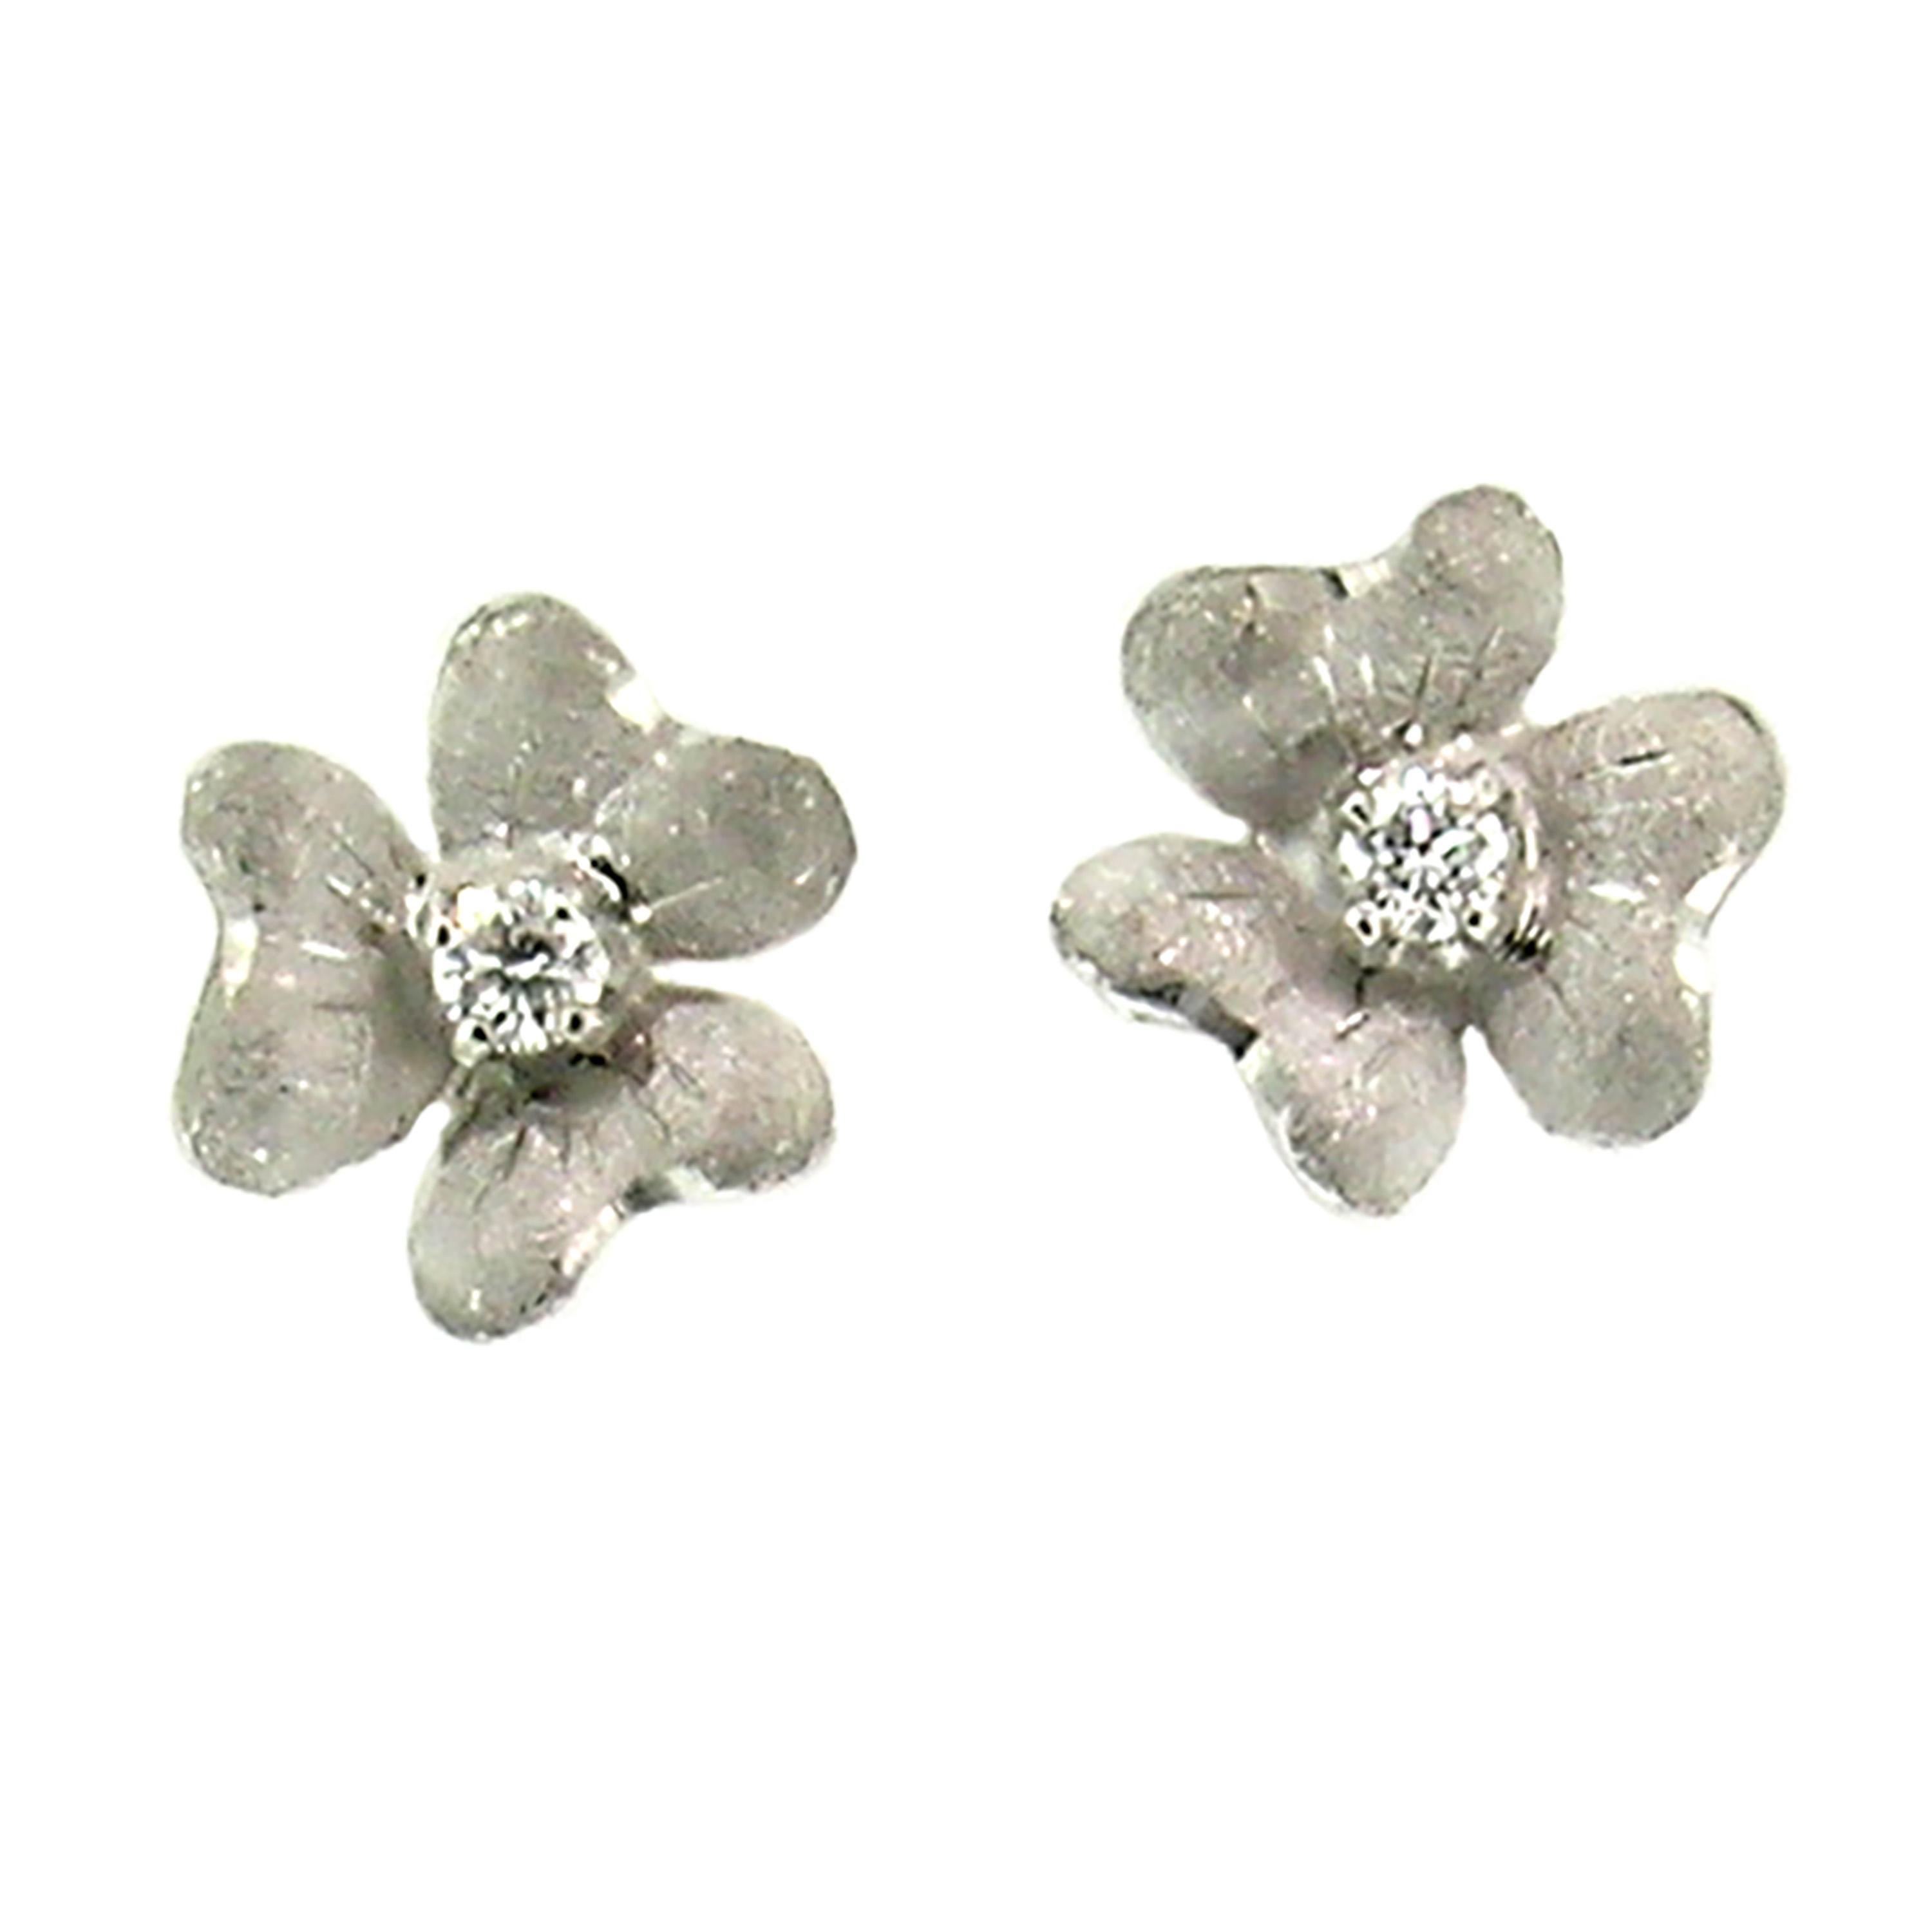 These sweet Floral stud earrings are hand engraved with a richly detailed Florentine finish. They are a sculpted, three-dimensional shape that sits beautifully on the ear, and each is set with a high quality diamond (with a total weight of 0.06ct).